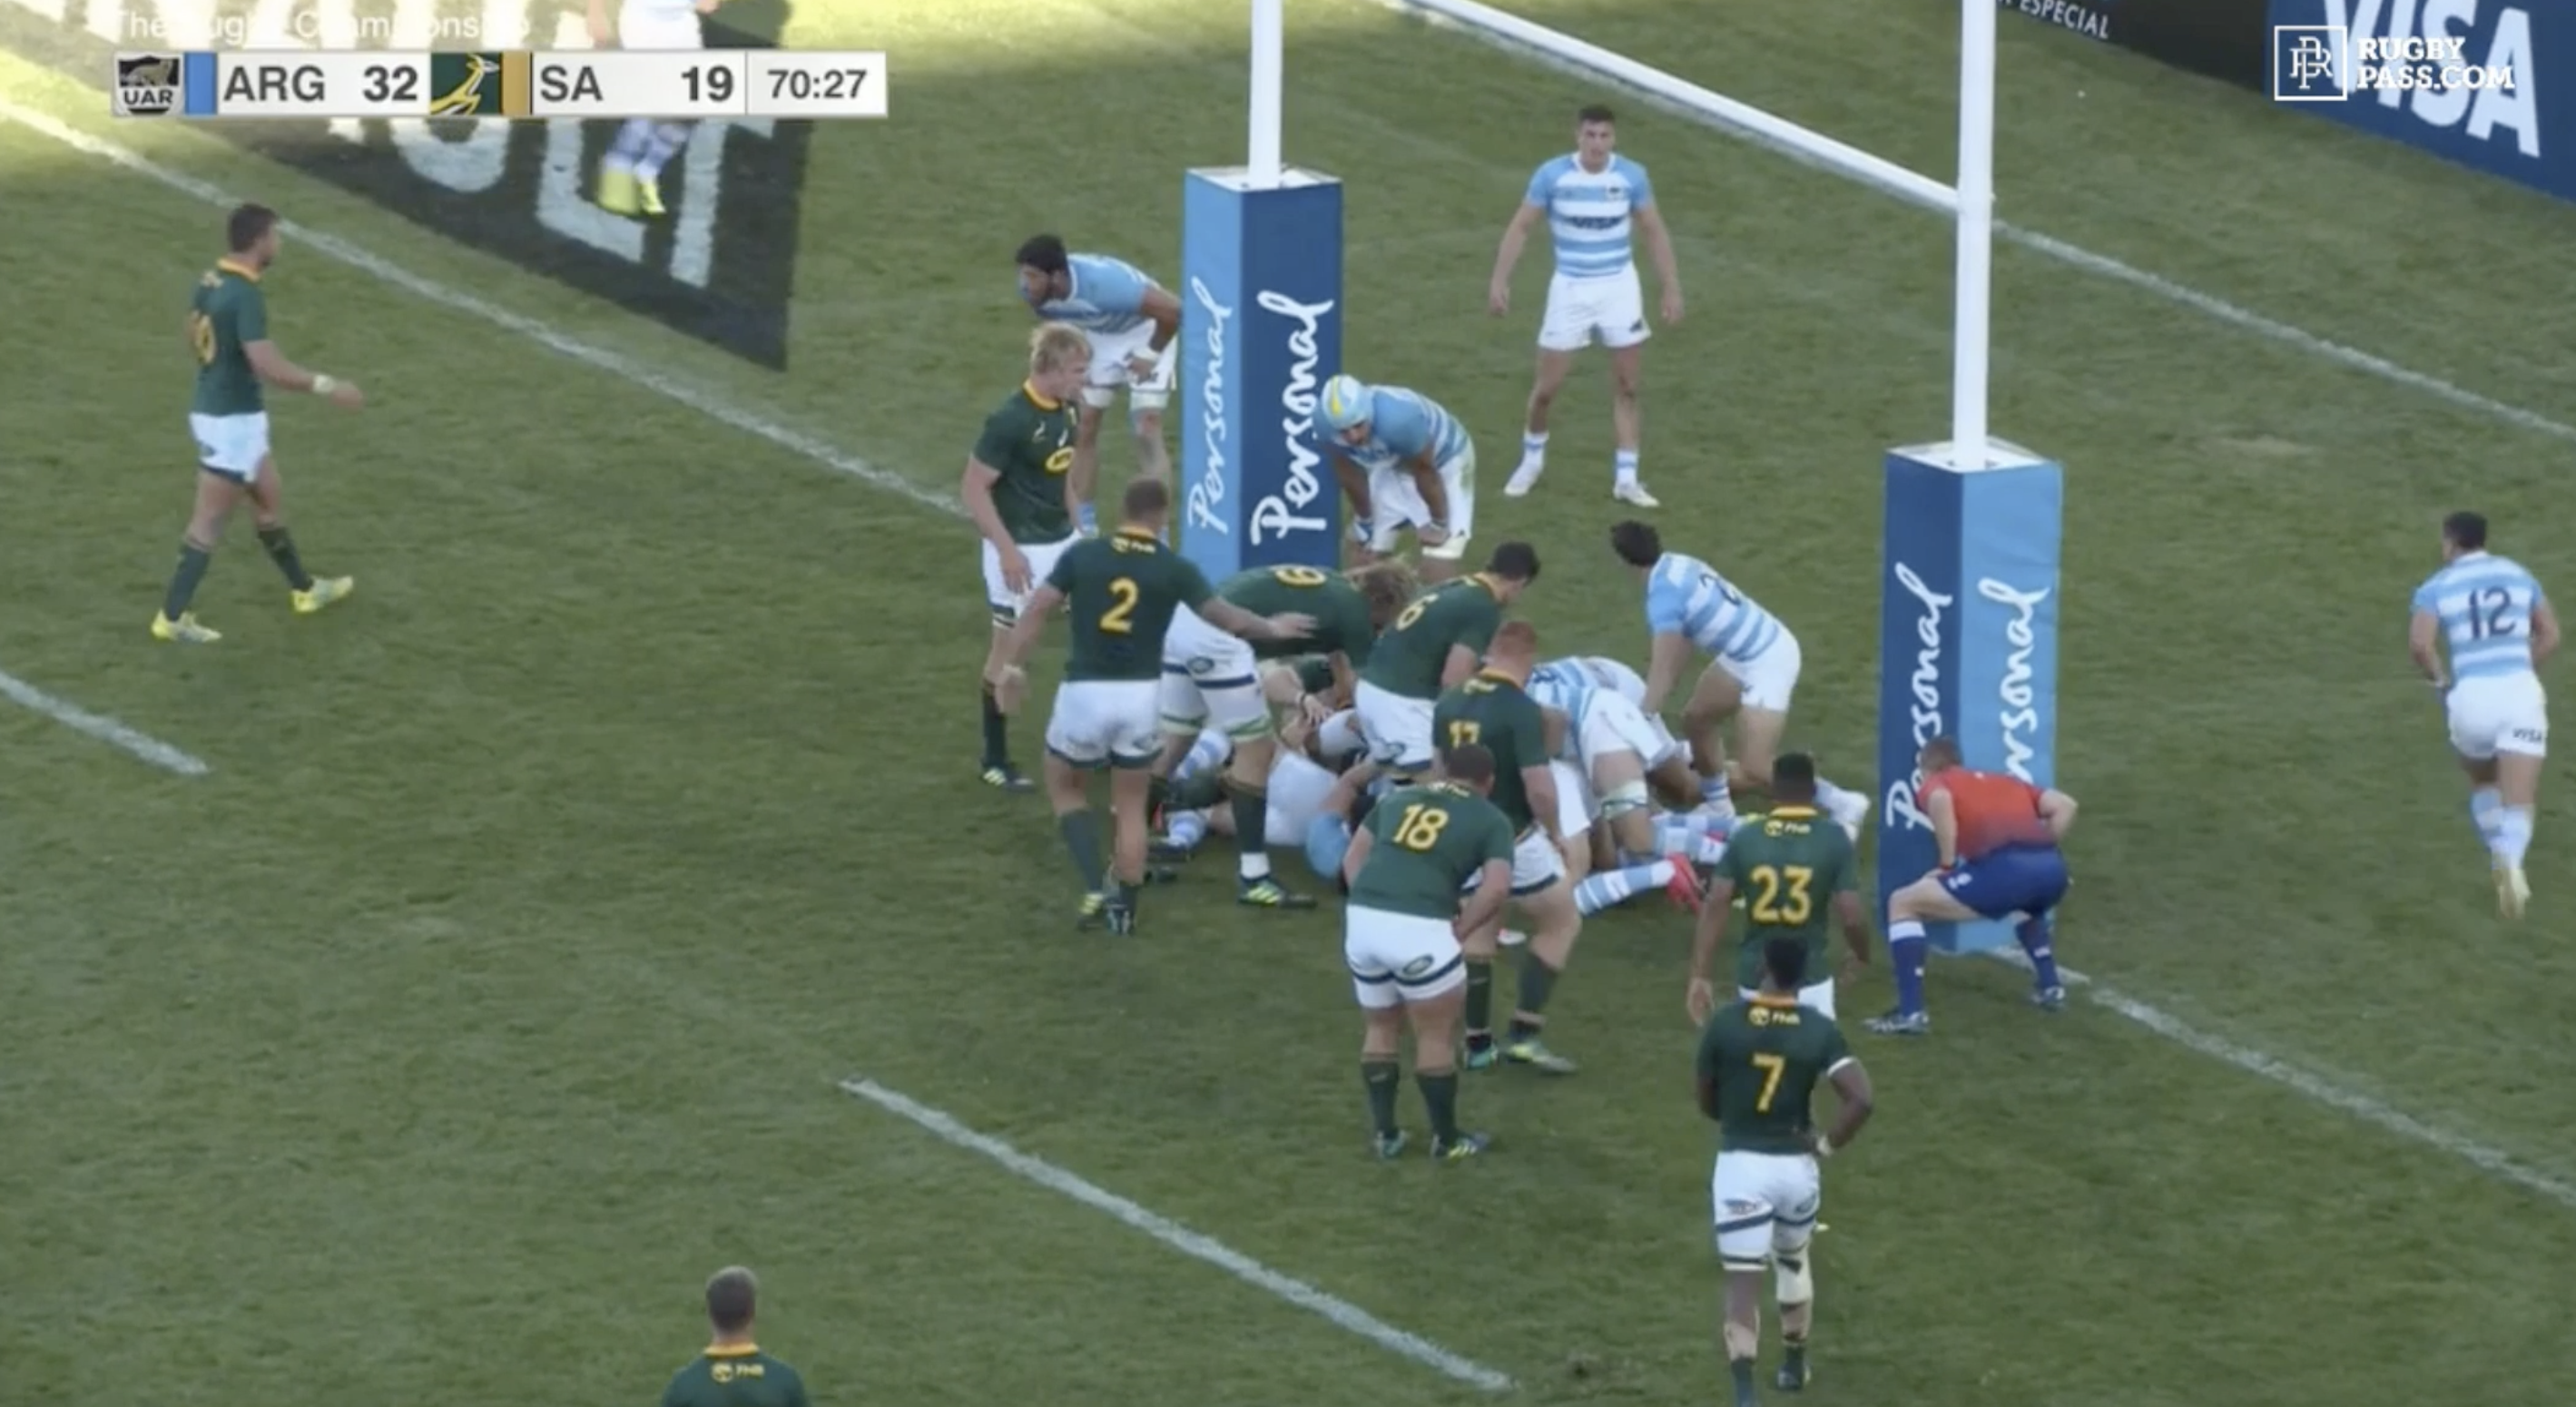 WATCH: Free-flowing  Argentina go full Hail Mary after player steps 4 South Africans from behind try line